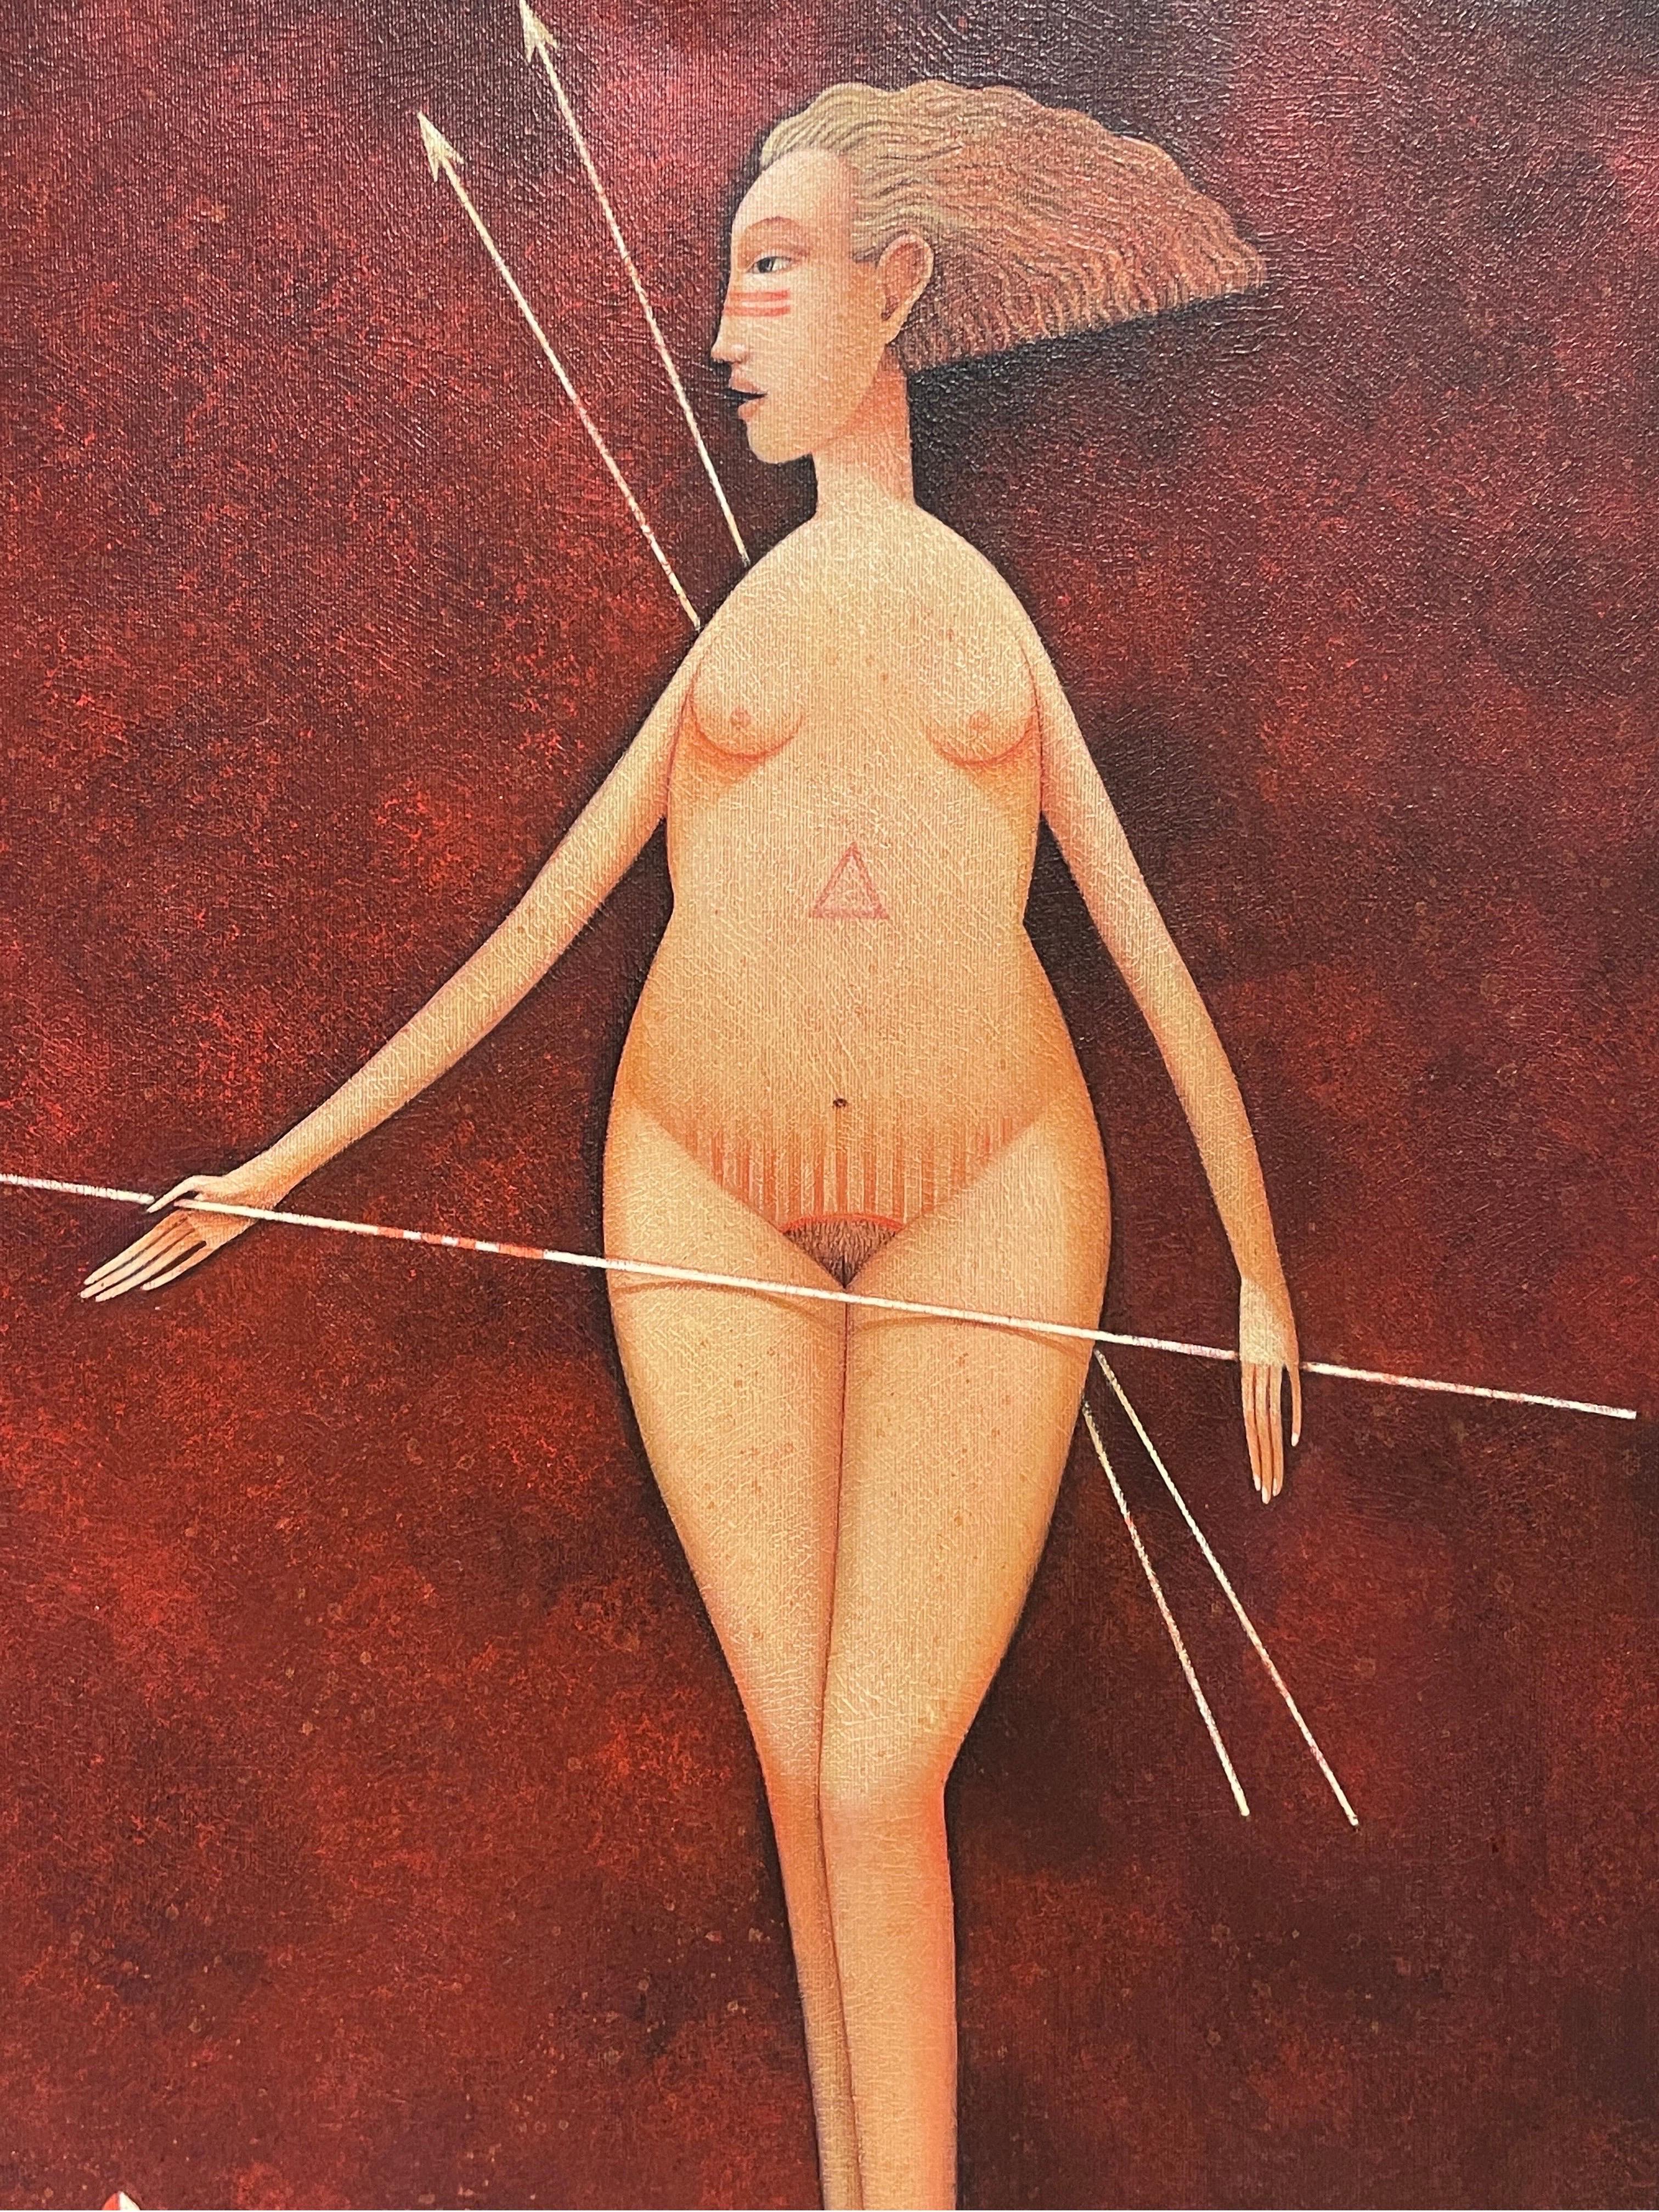 Pair French Surrealist Nude Man & Woman Portraits Archery Bow & Arrow signed For Sale 1